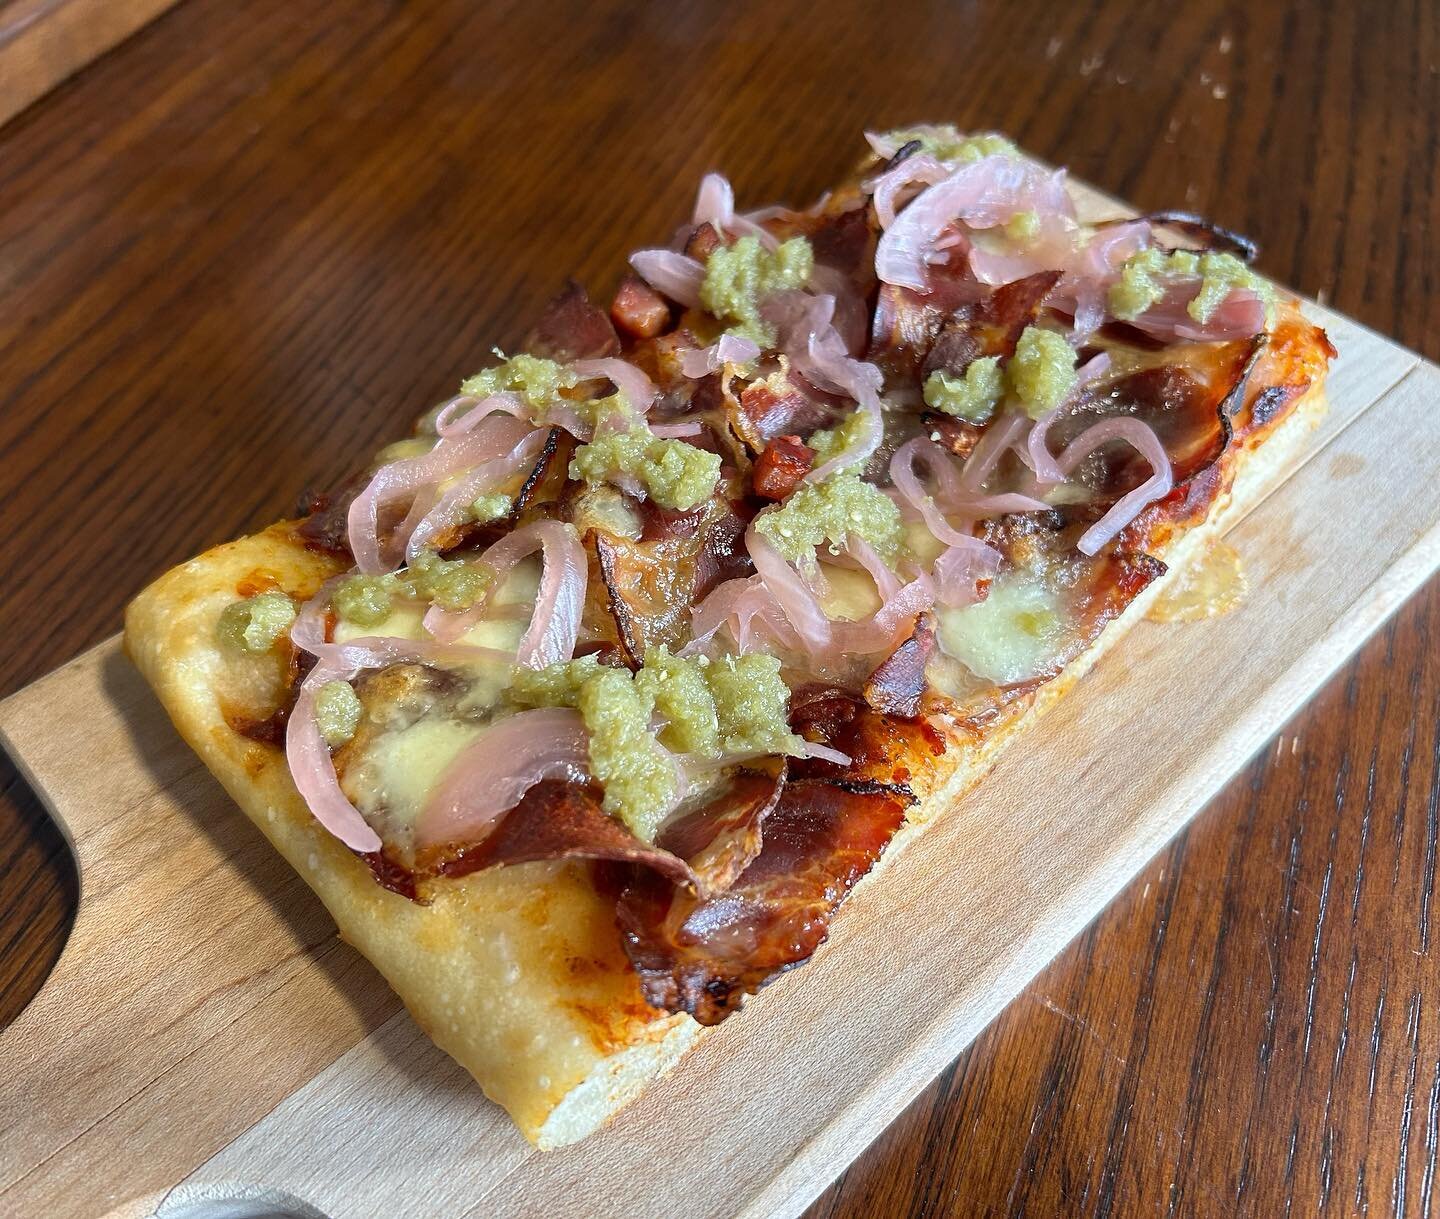 Are we a corner or middle kinda pizza lover? 
No matter how you slice it this one&rsquo;s a goodie. 
Focacci-za 
House sauce, smoked bacon bits, @laculturasalumi capacollo and fresh mozza. Garnished with pickled shallots and Counter garlic scape sals